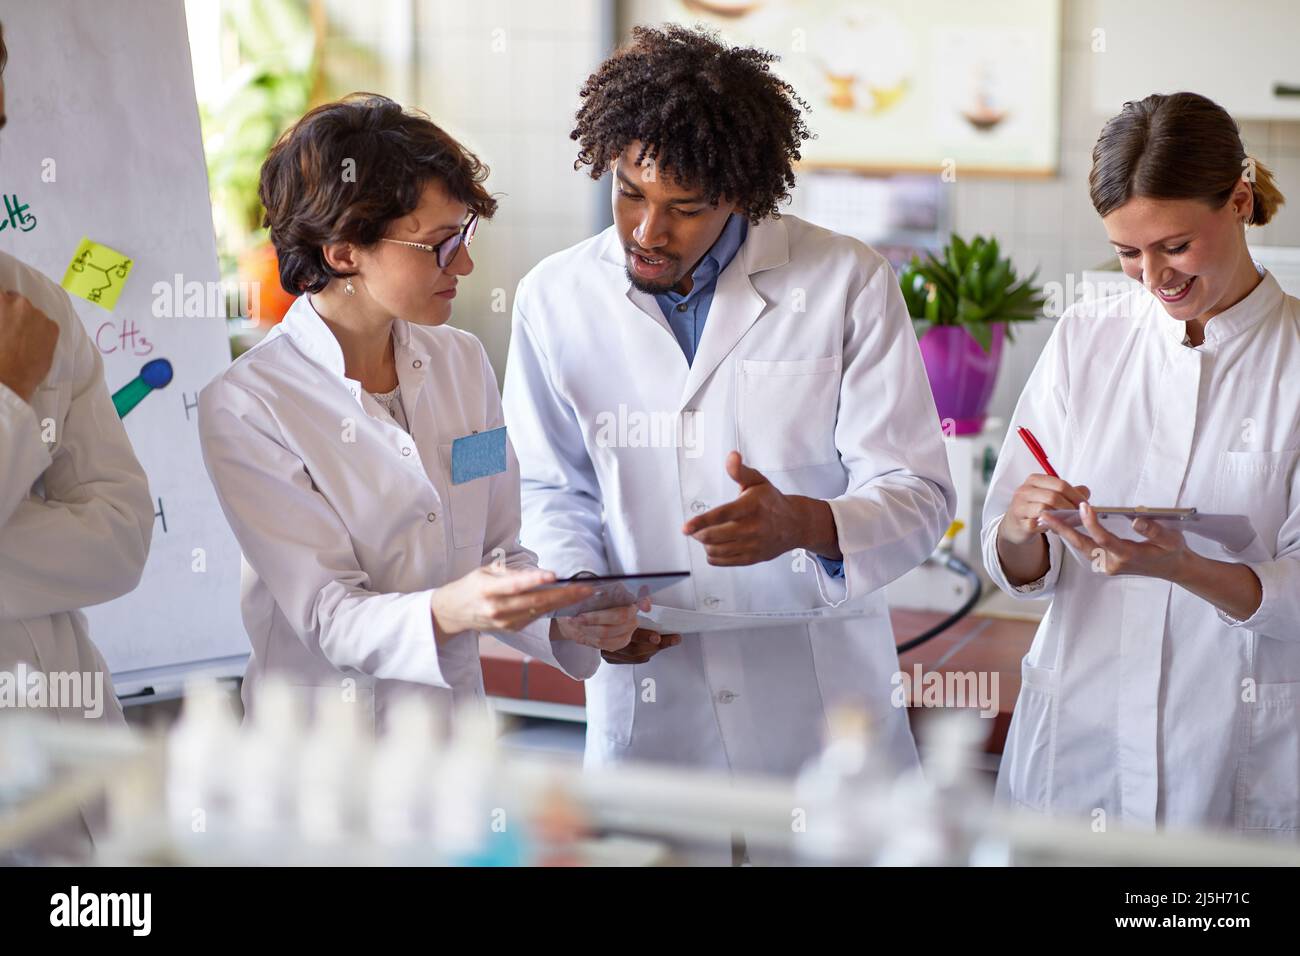 Group of young medical workers working in lab Stock Photo